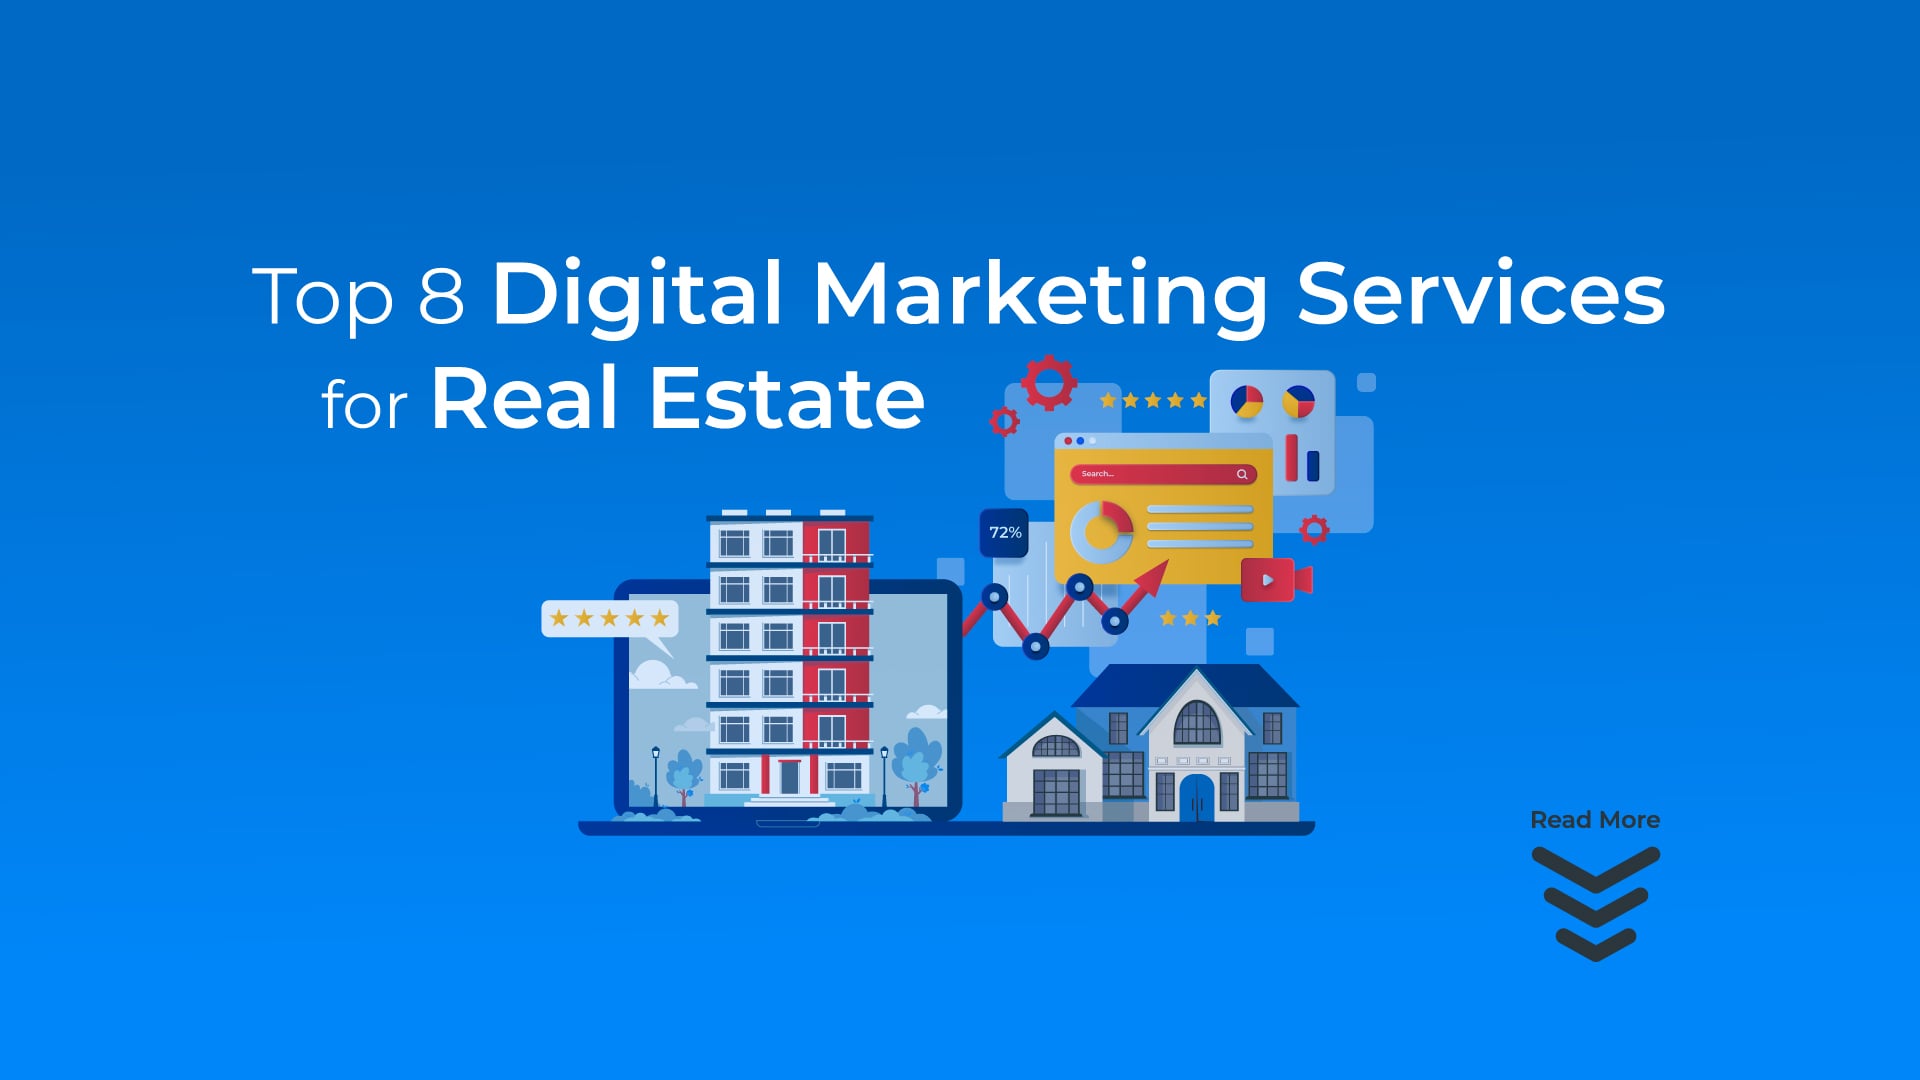 Top 8 Digital Marketing Services for Real Estate